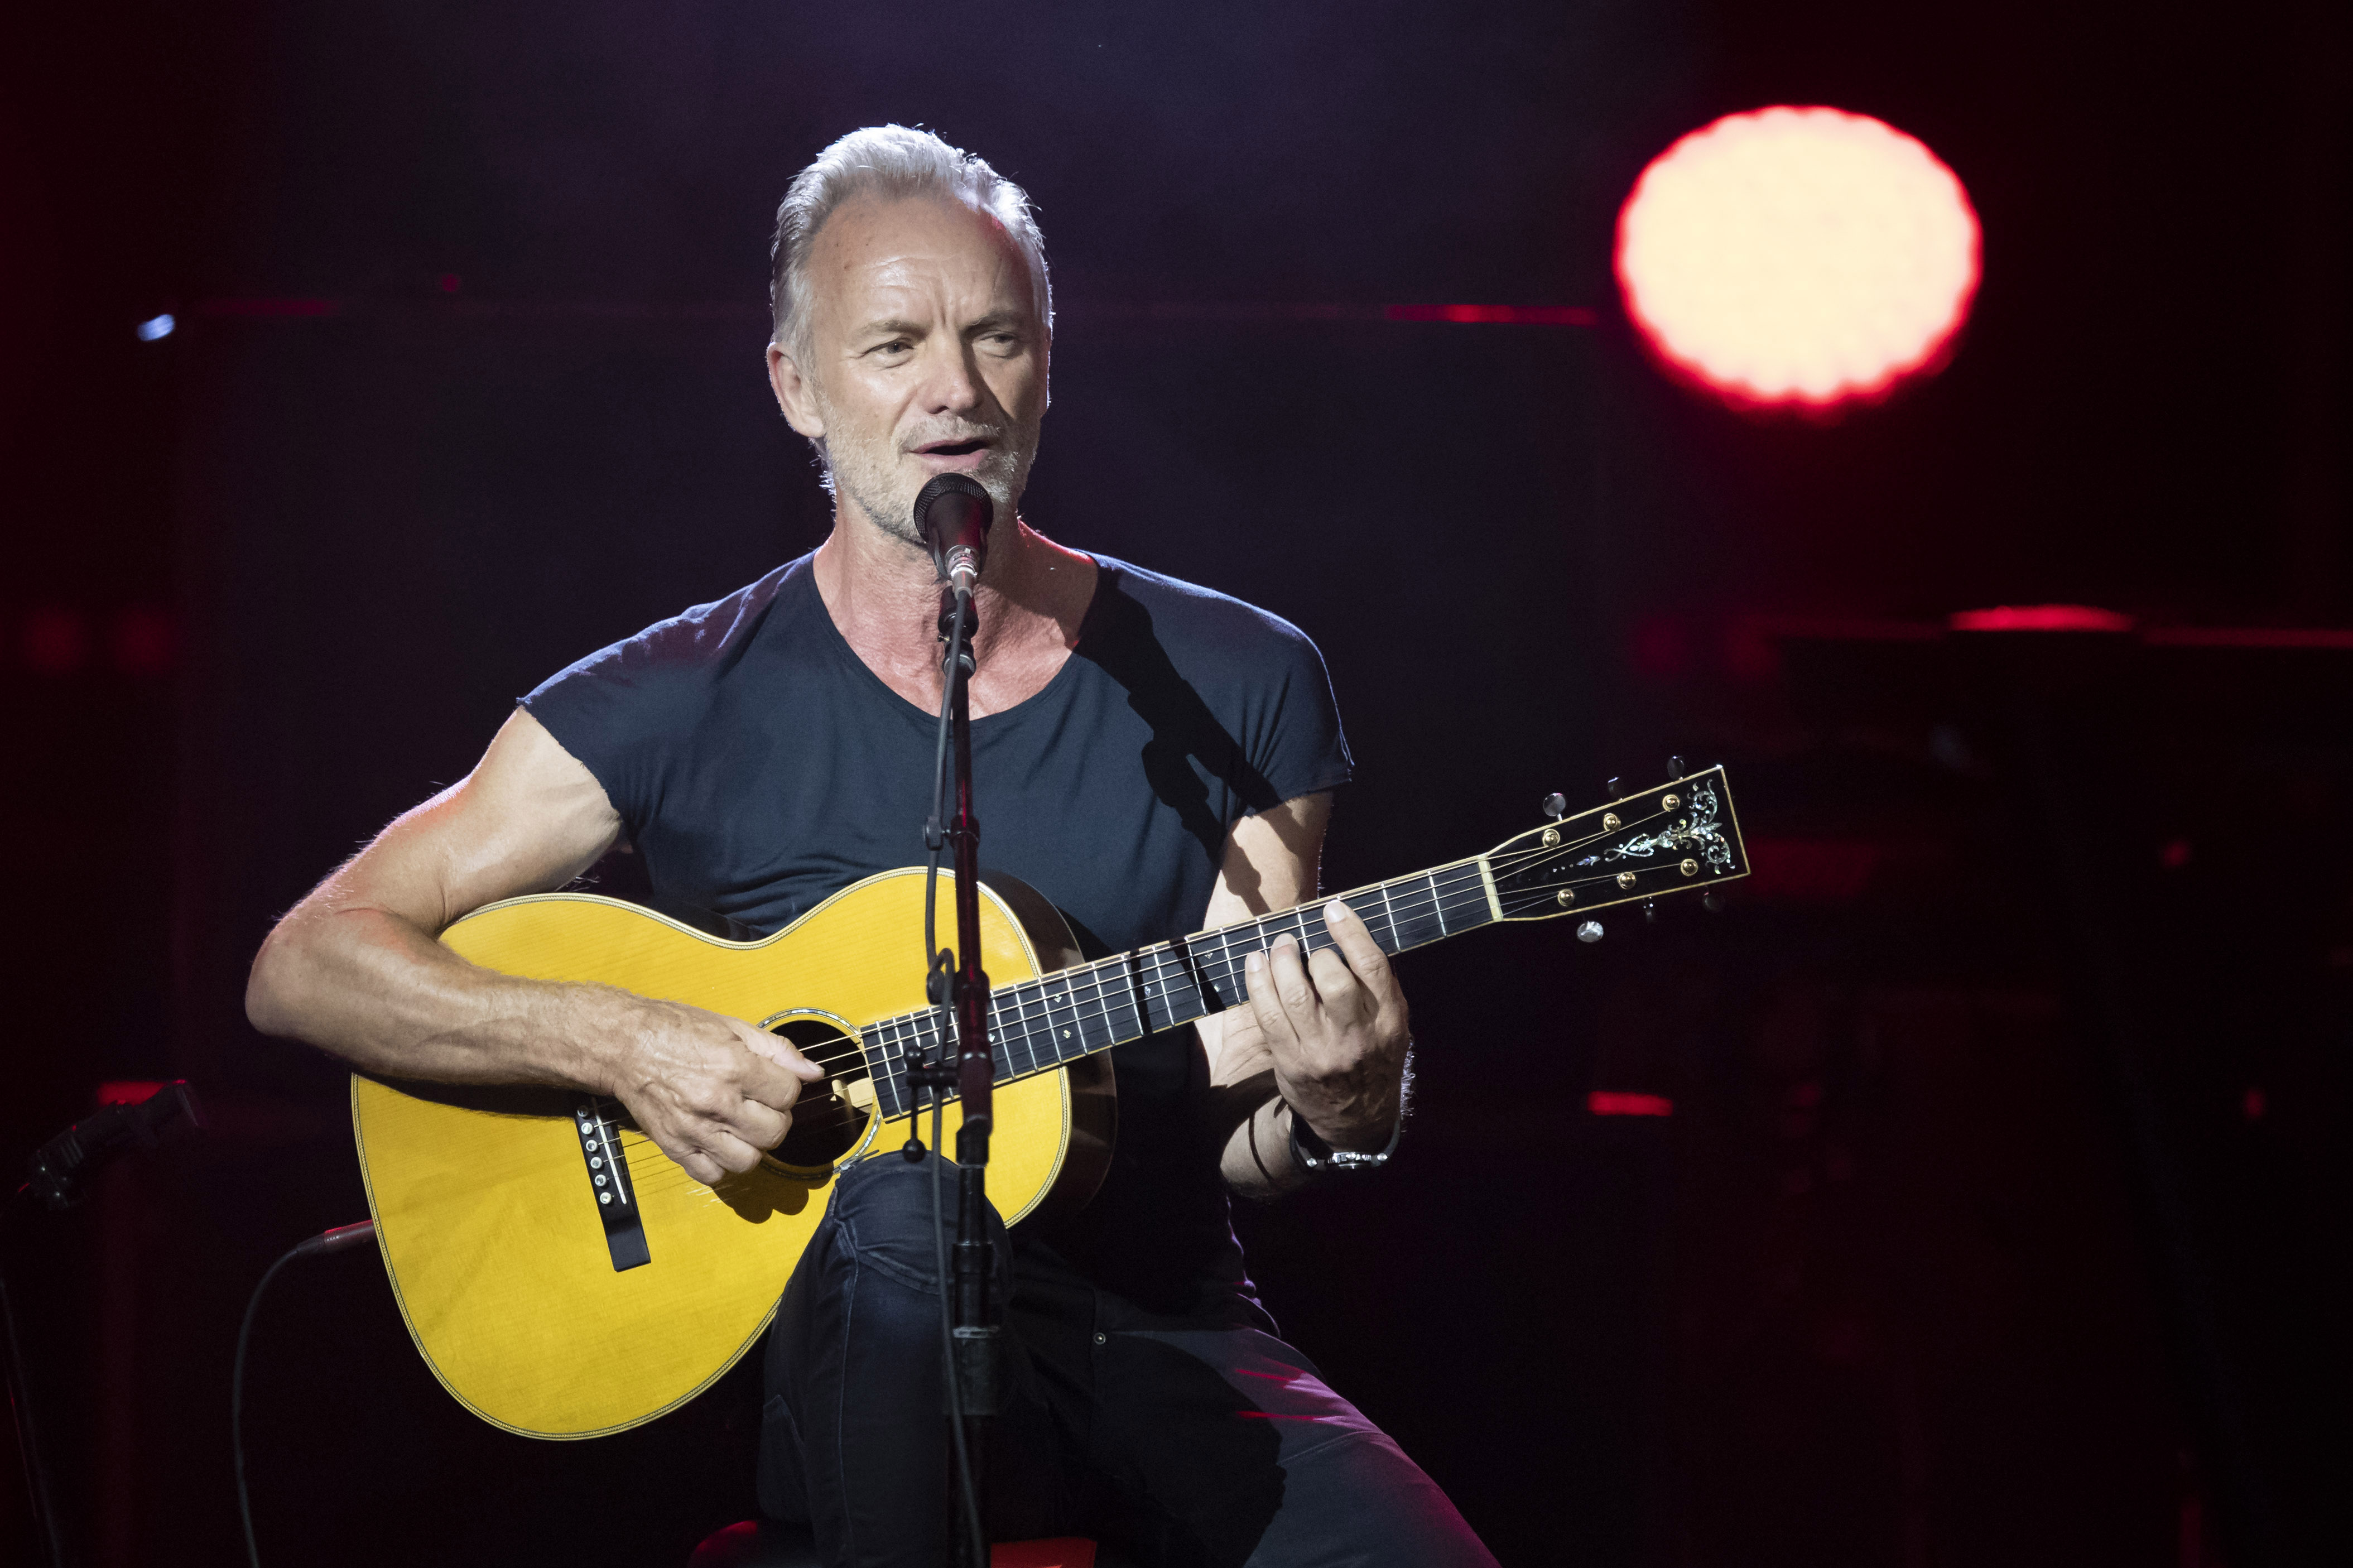 Sting on stage during a concert at the Monte-Carlo Sporting concert hall on August 2, 2019 in Monaco. | Source: Getty Images